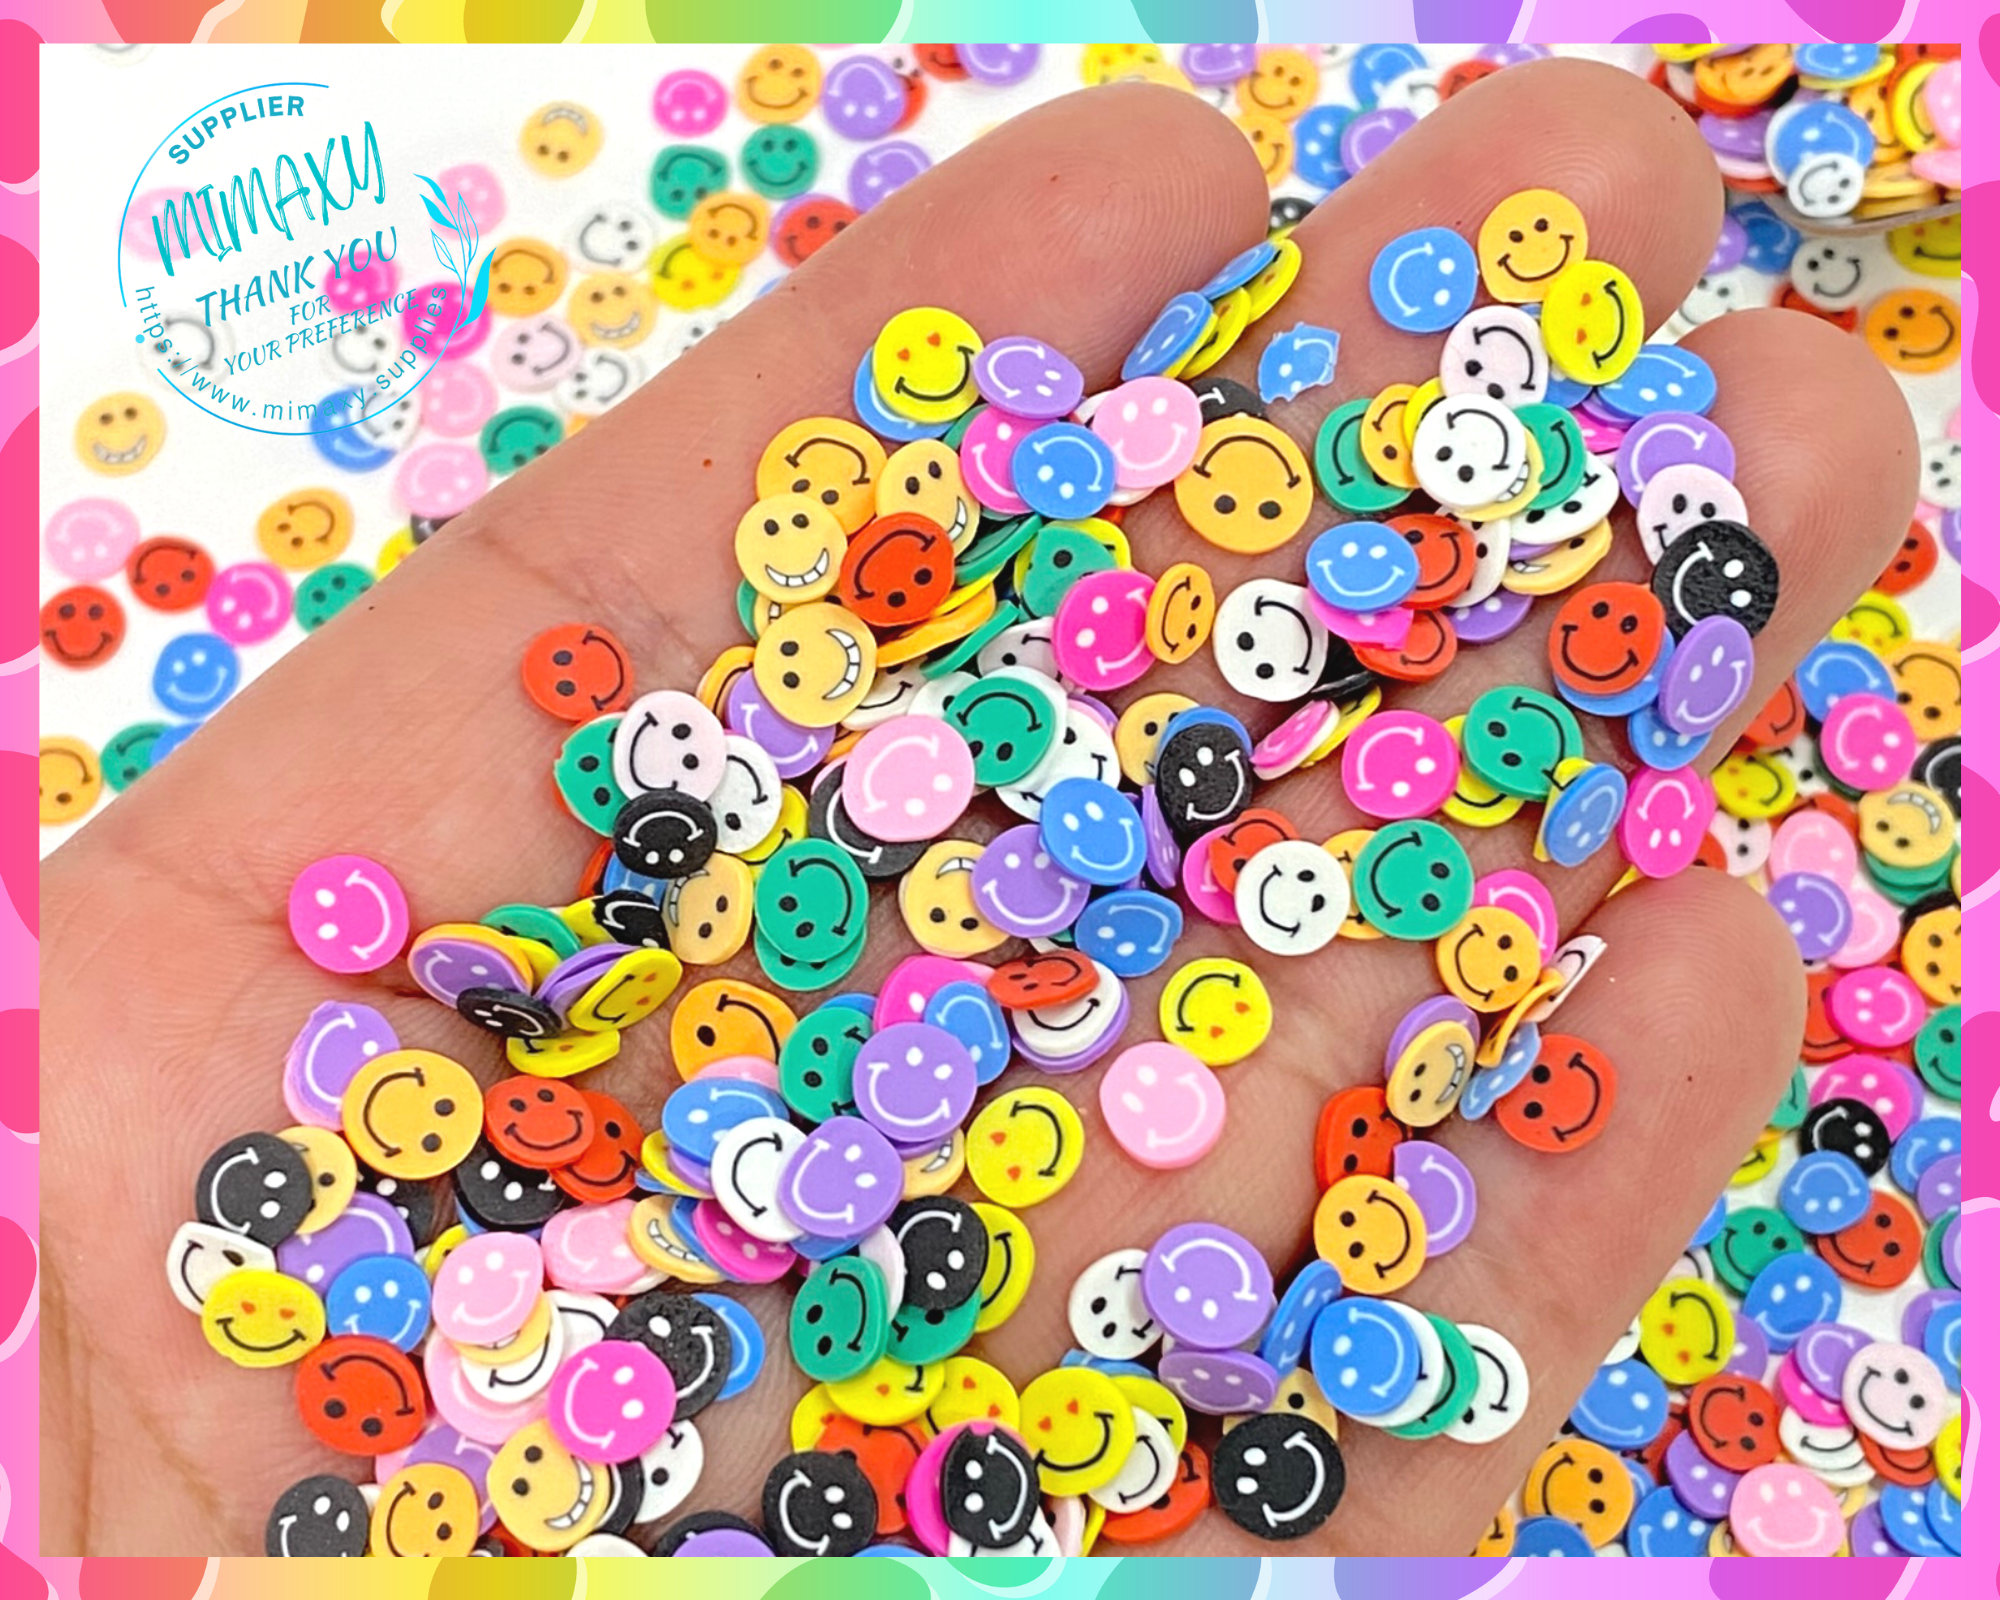 4600pcs Polymer Clay Beads for Bracelets Making Kit Crafts for Girls Ages  8-12 Beads for Jewelry Making With Charms Kit Smiley Face Beads 